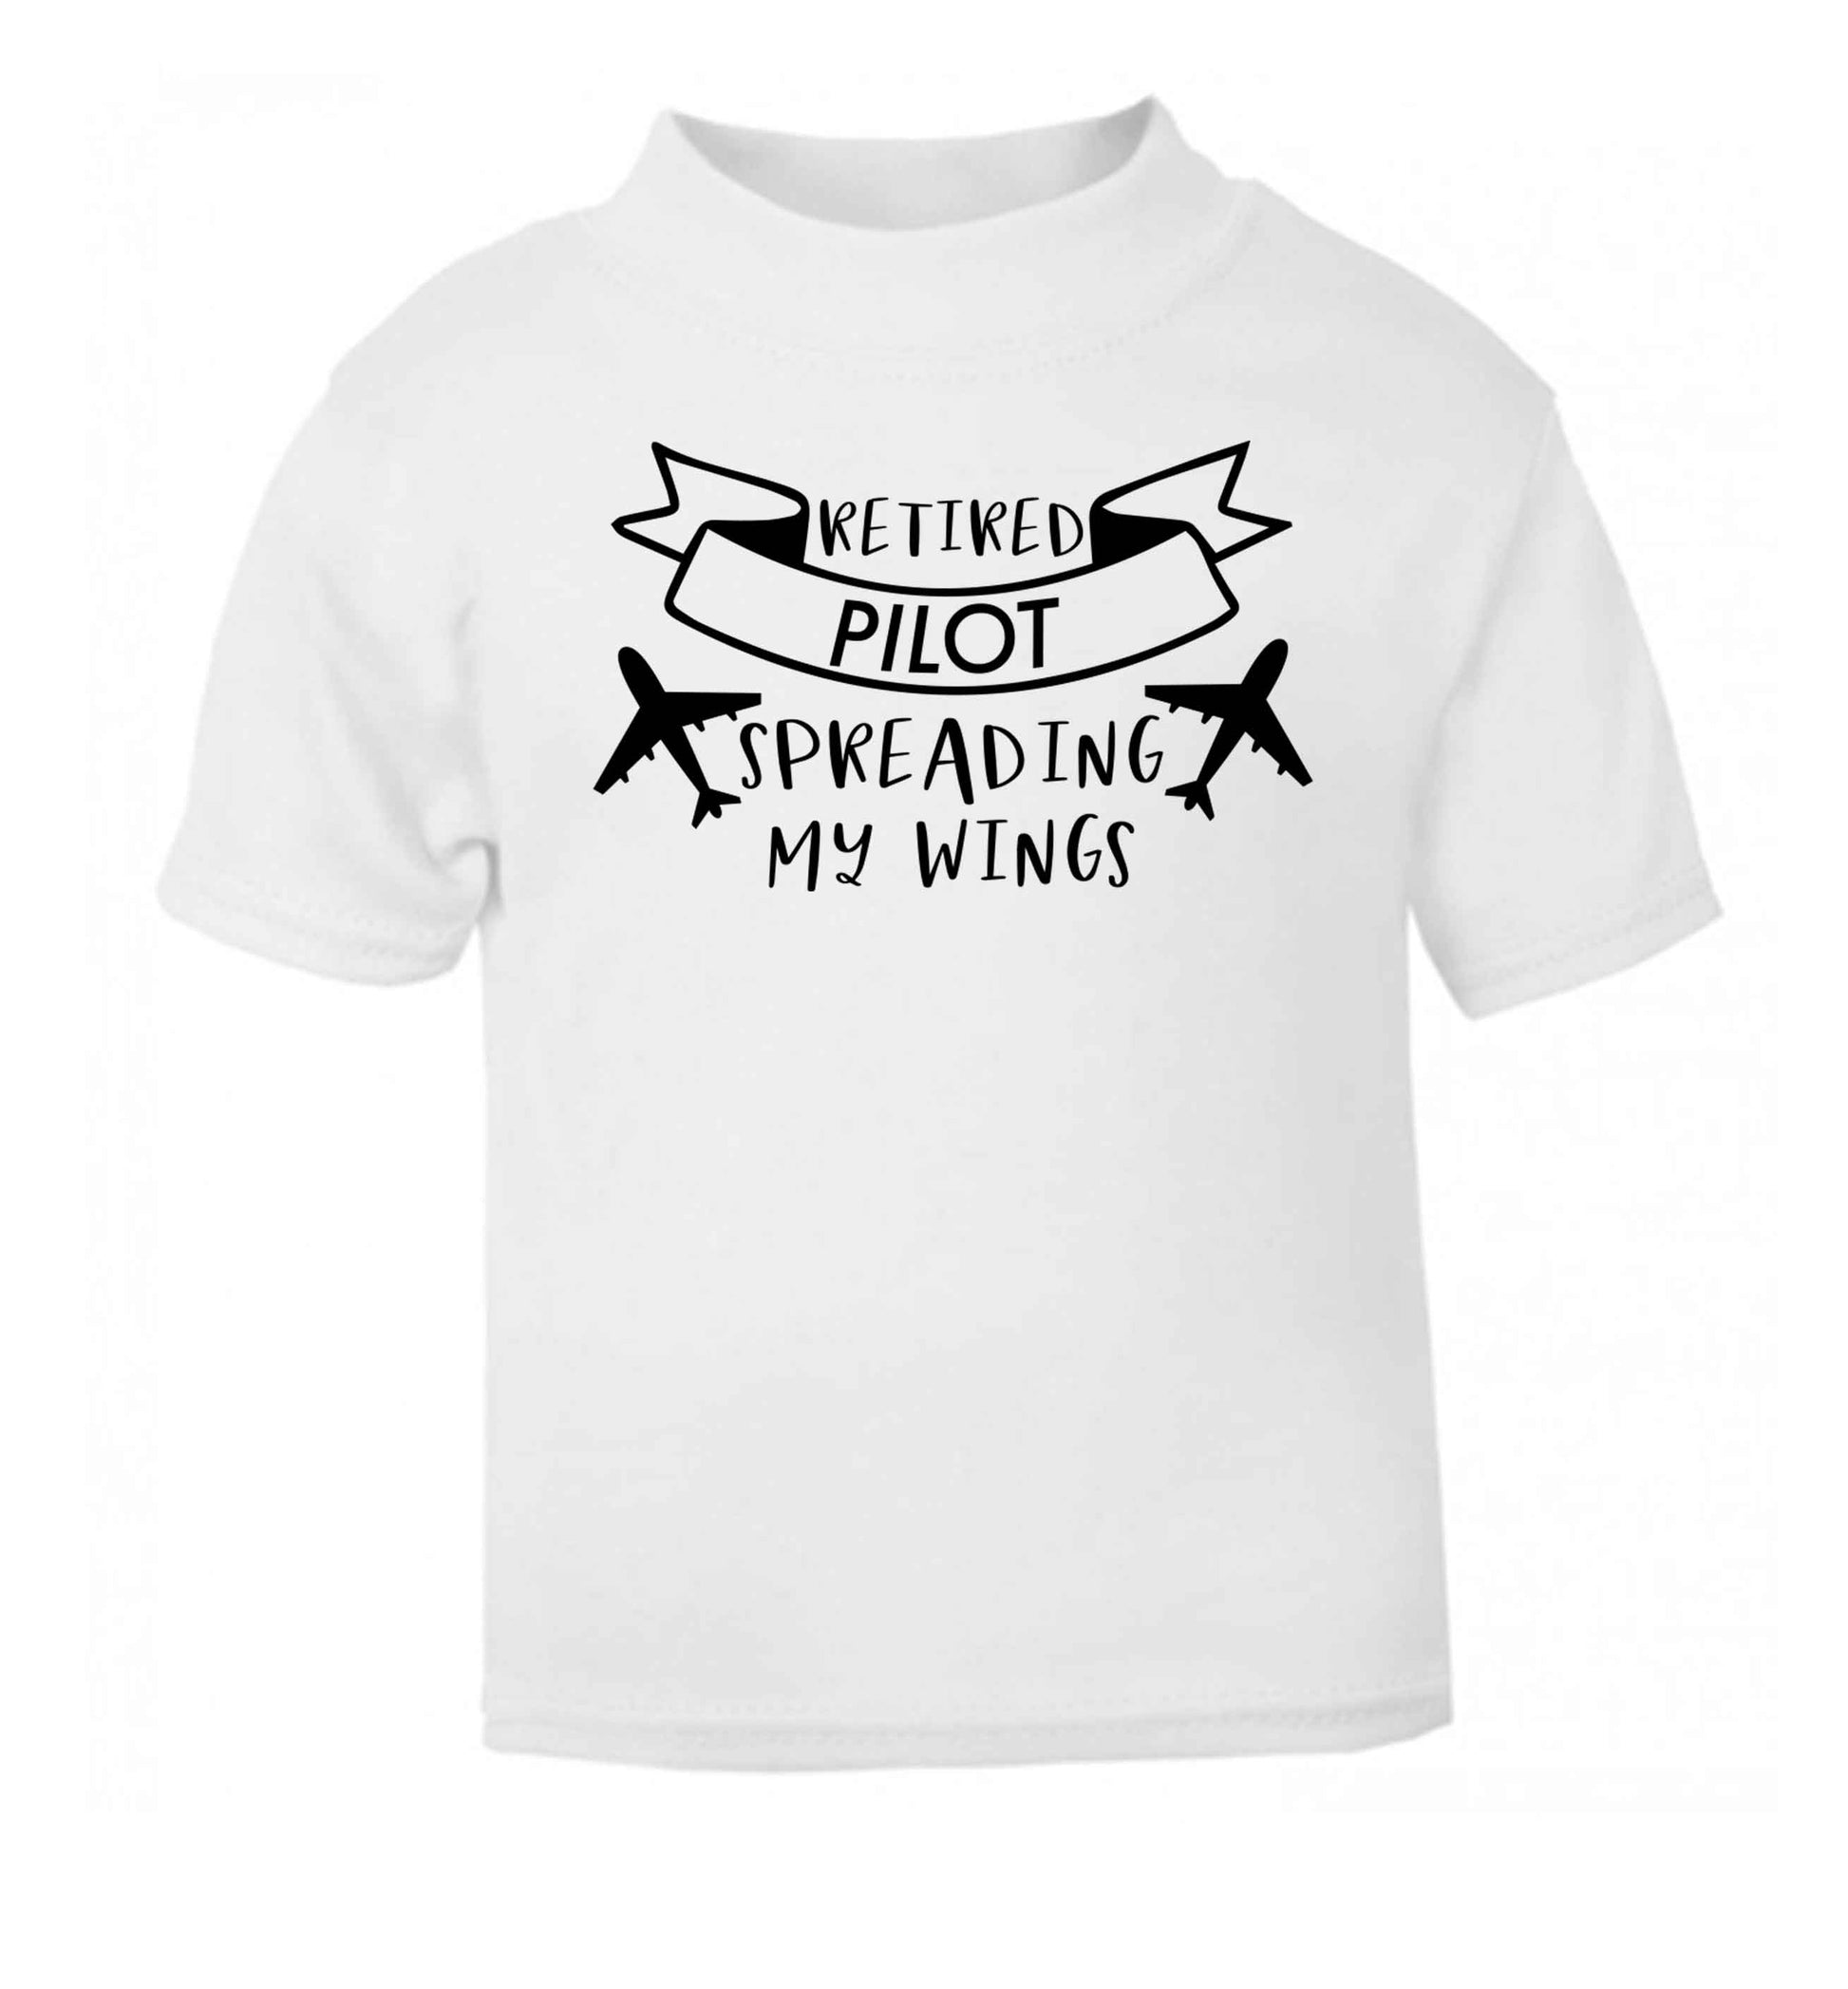 Retired pilot spreading my wings white Baby Toddler Tshirt 2 Years